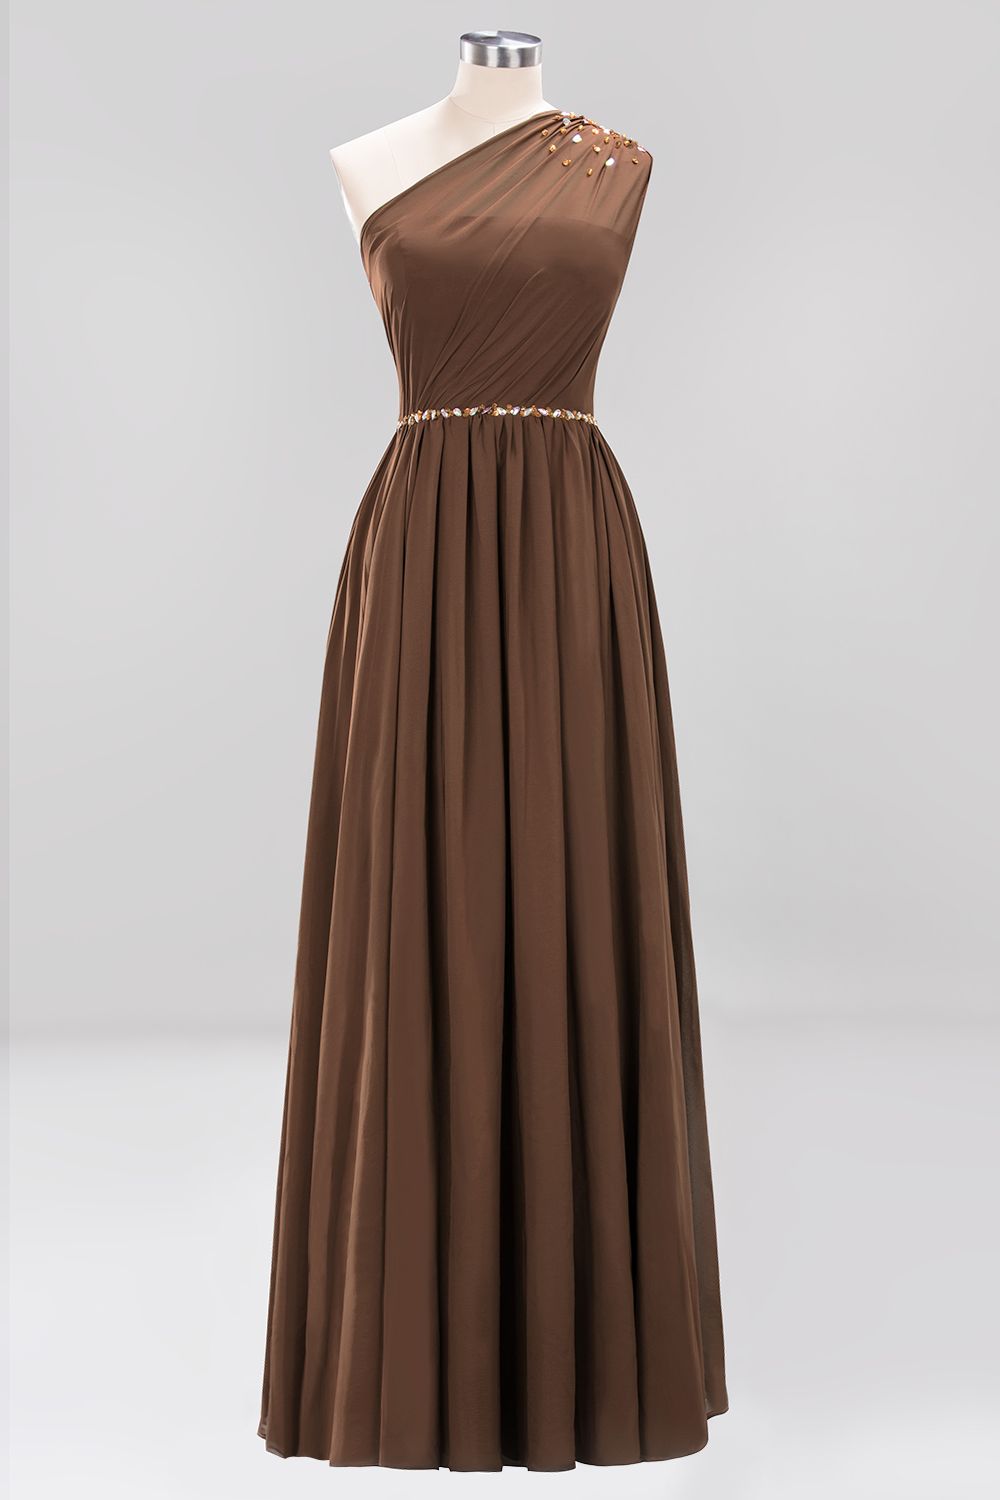 Long A-Line Burgundy Chiffon One Shoulder Bridesmaid Dresses with Beadings-BIZTUNNEL